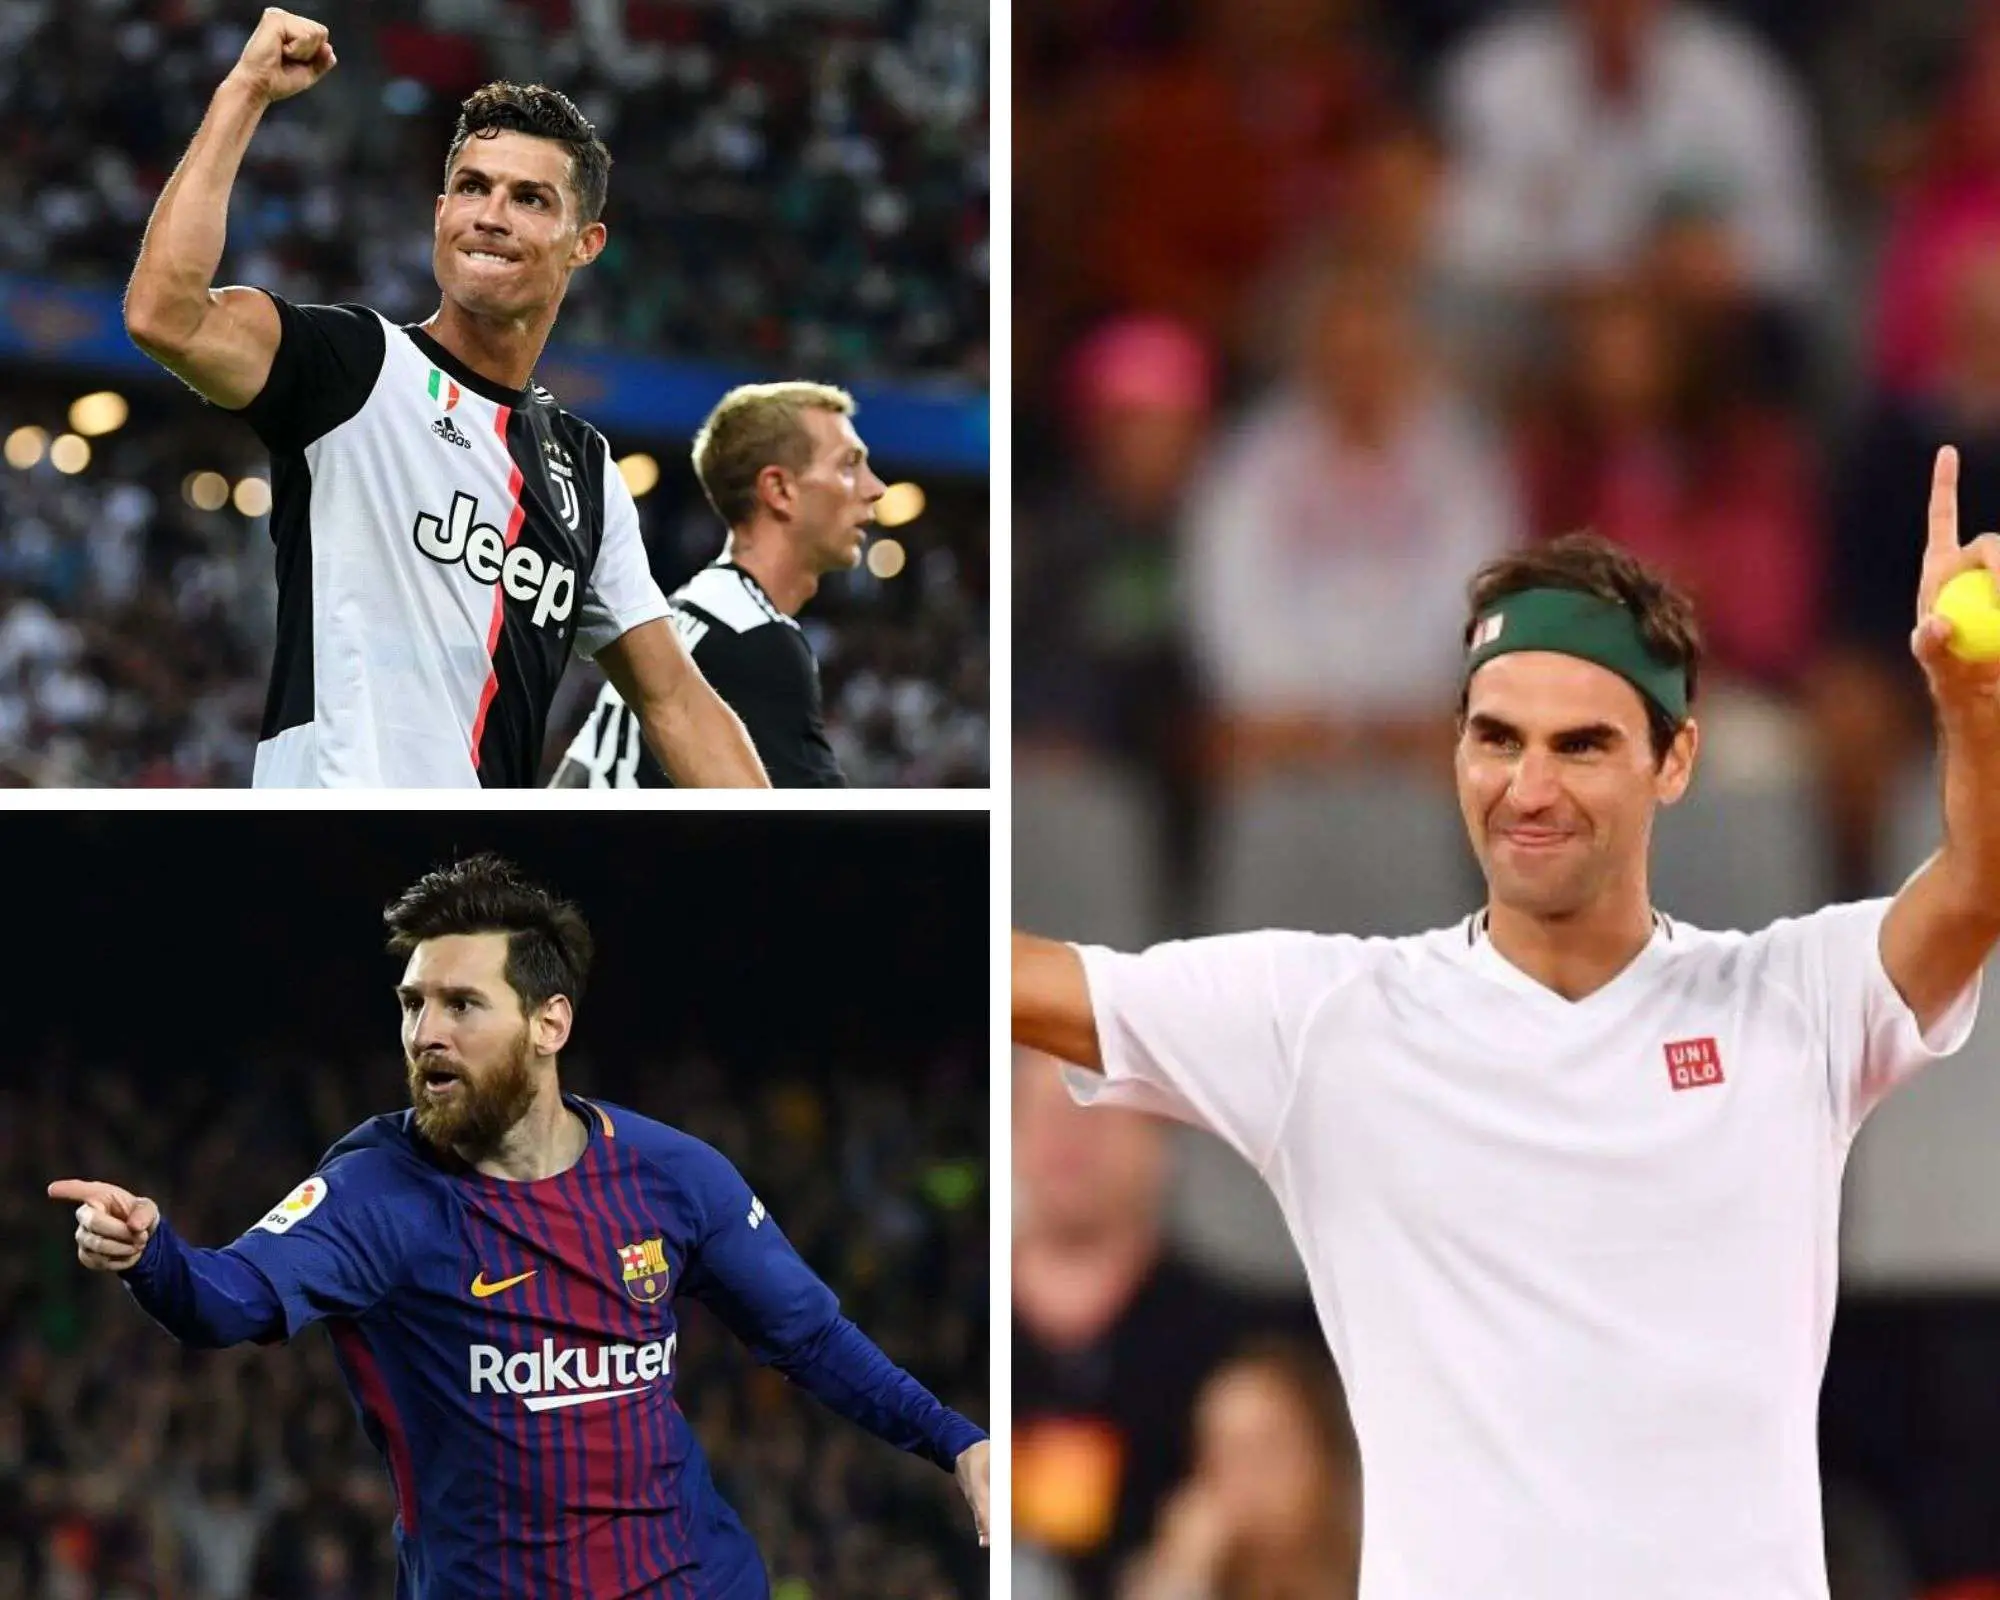 Forbes List Of The World's Highest Paid Athletes 2020